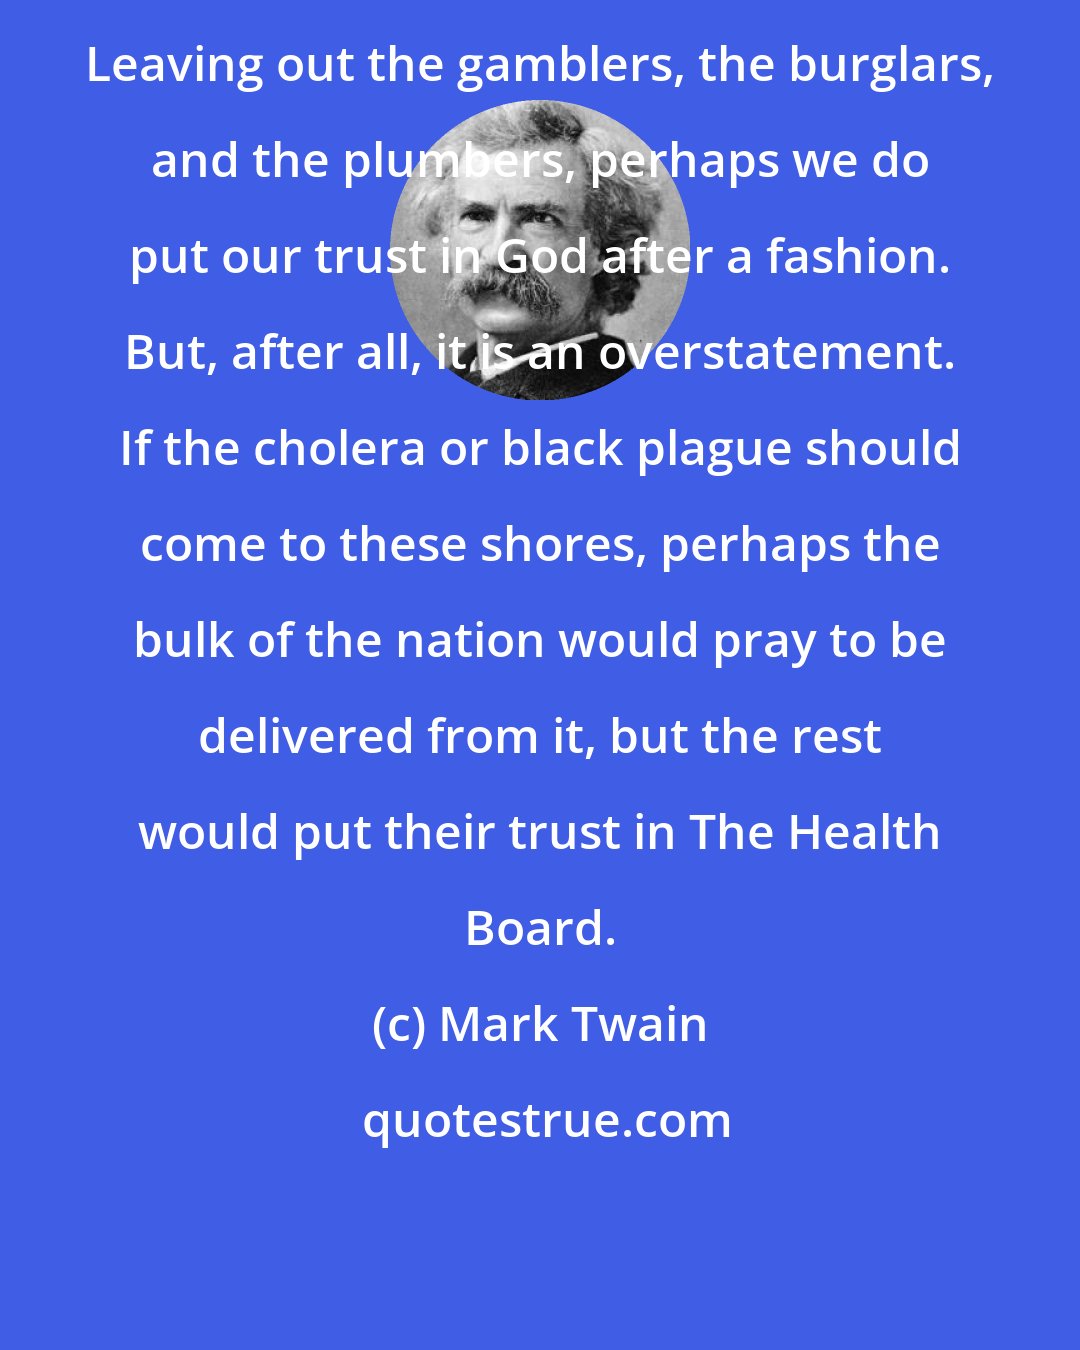 Mark Twain: Leaving out the gamblers, the burglars, and the plumbers, perhaps we do put our trust in God after a fashion. But, after all, it is an overstatement. If the cholera or black plague should come to these shores, perhaps the bulk of the nation would pray to be delivered from it, but the rest would put their trust in The Health Board.